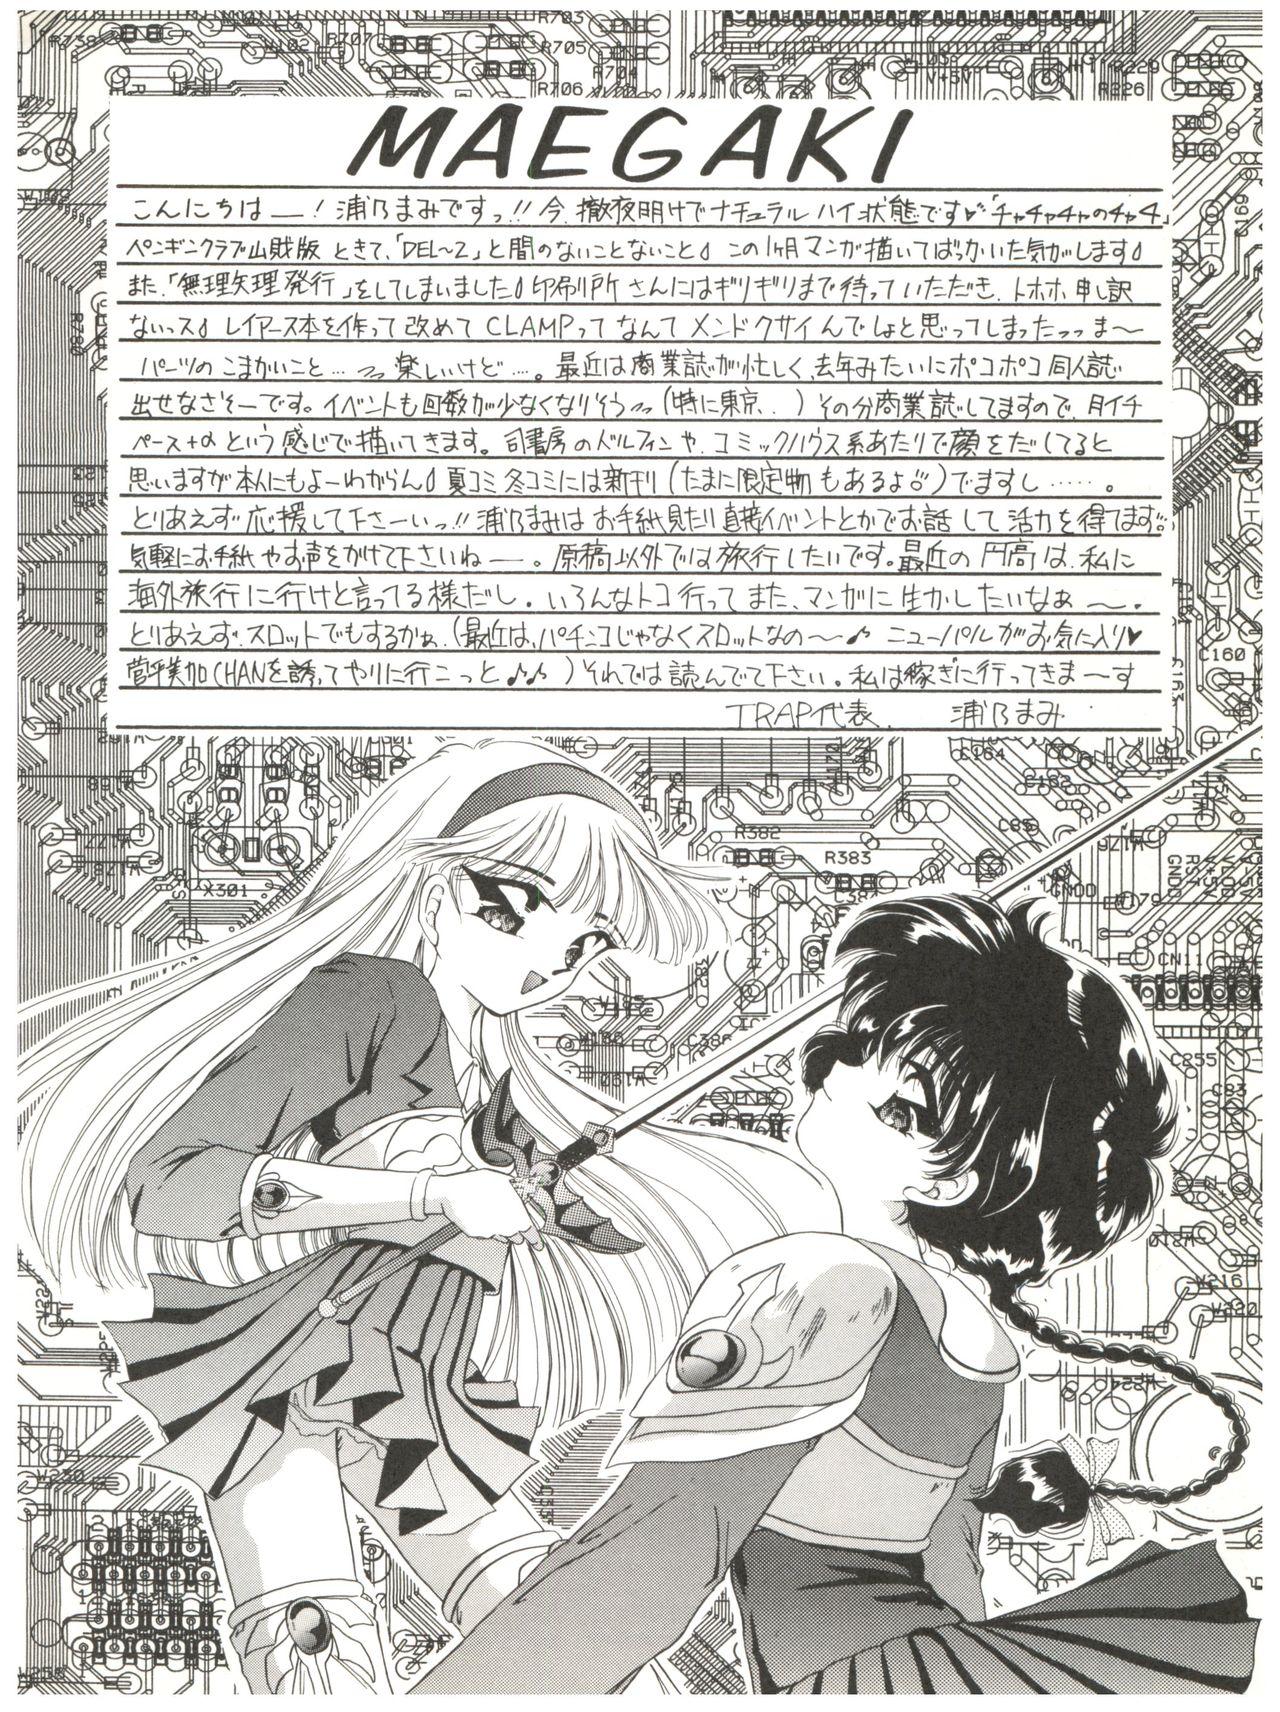 Hard Sex DELICIOUS 2nd STAGE - Magic knight rayearth Amatuer Sex - Page 4